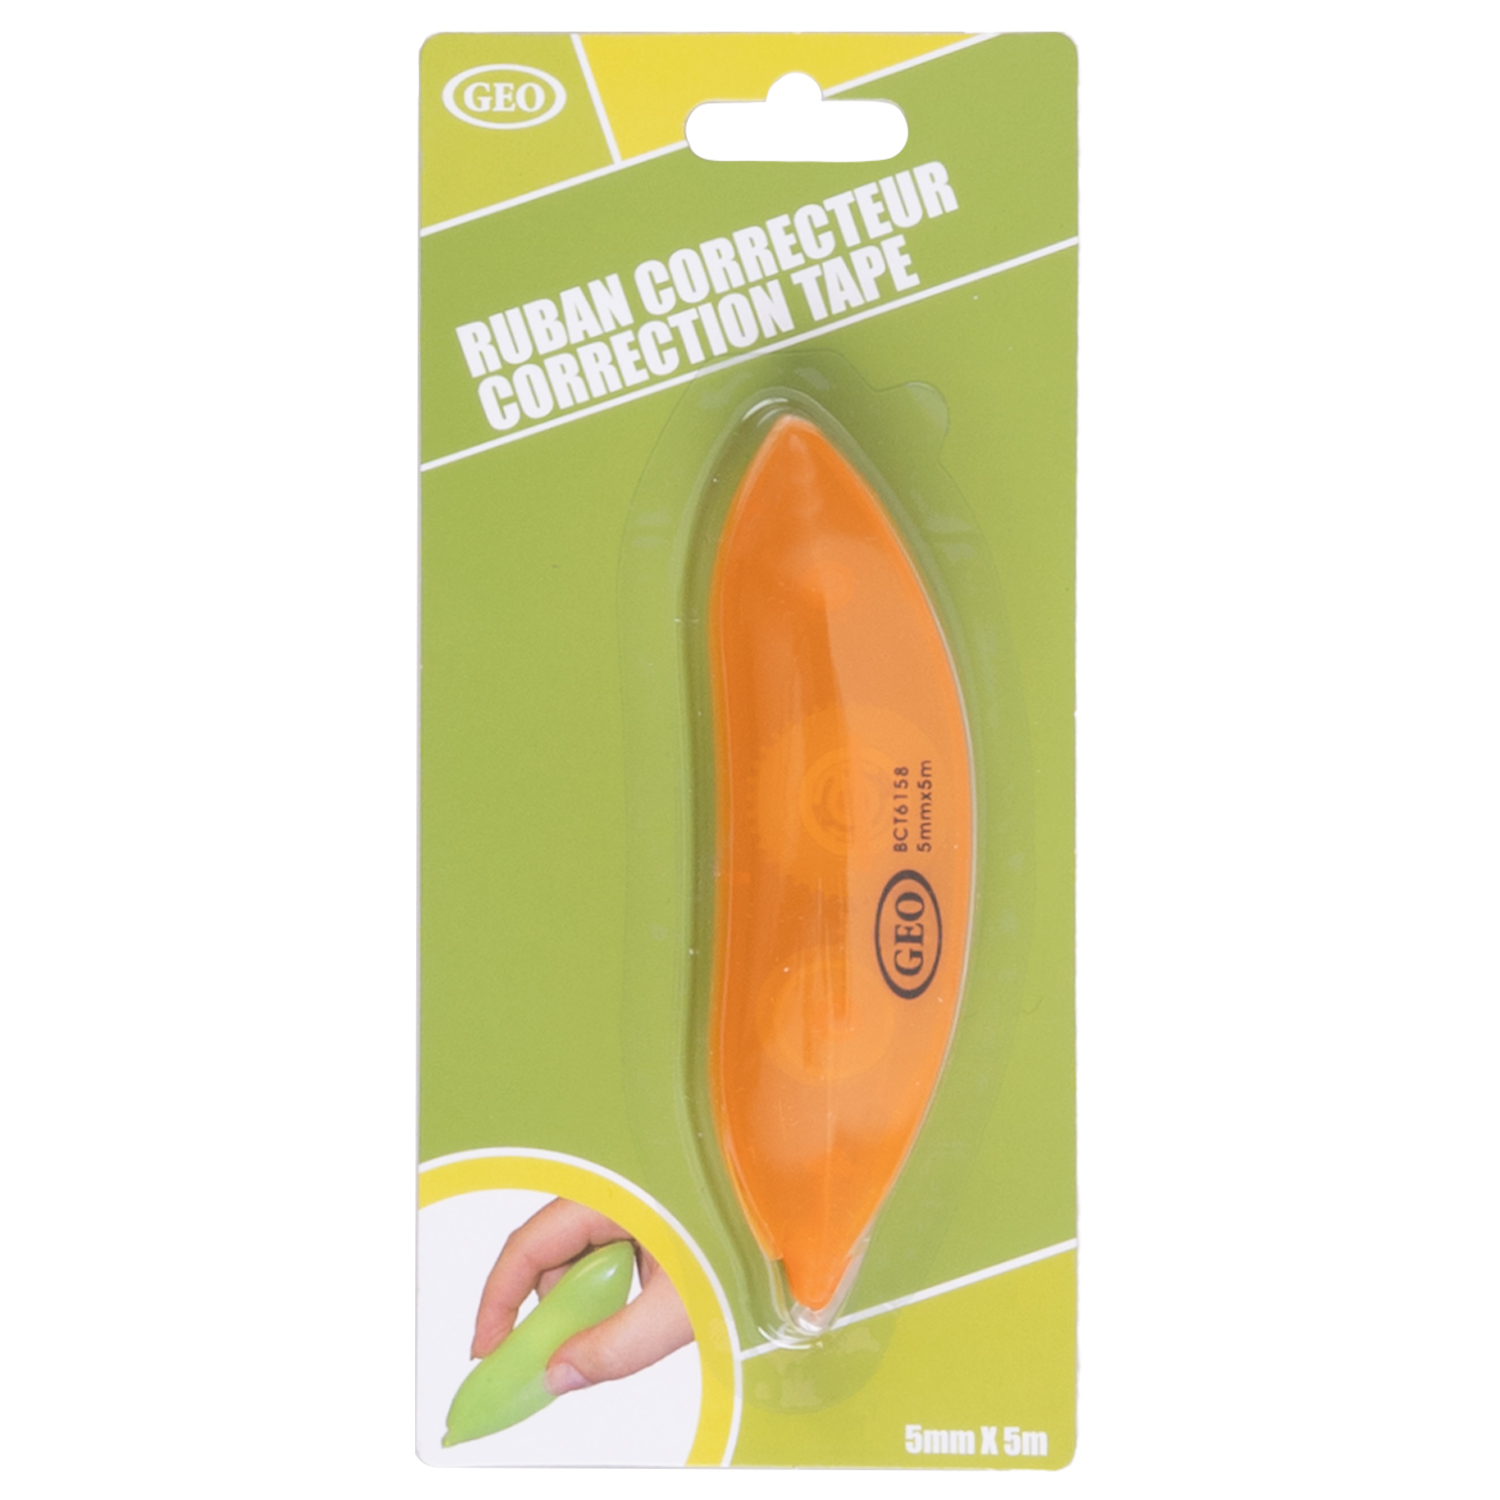 Geocan - Compact dry correction tape